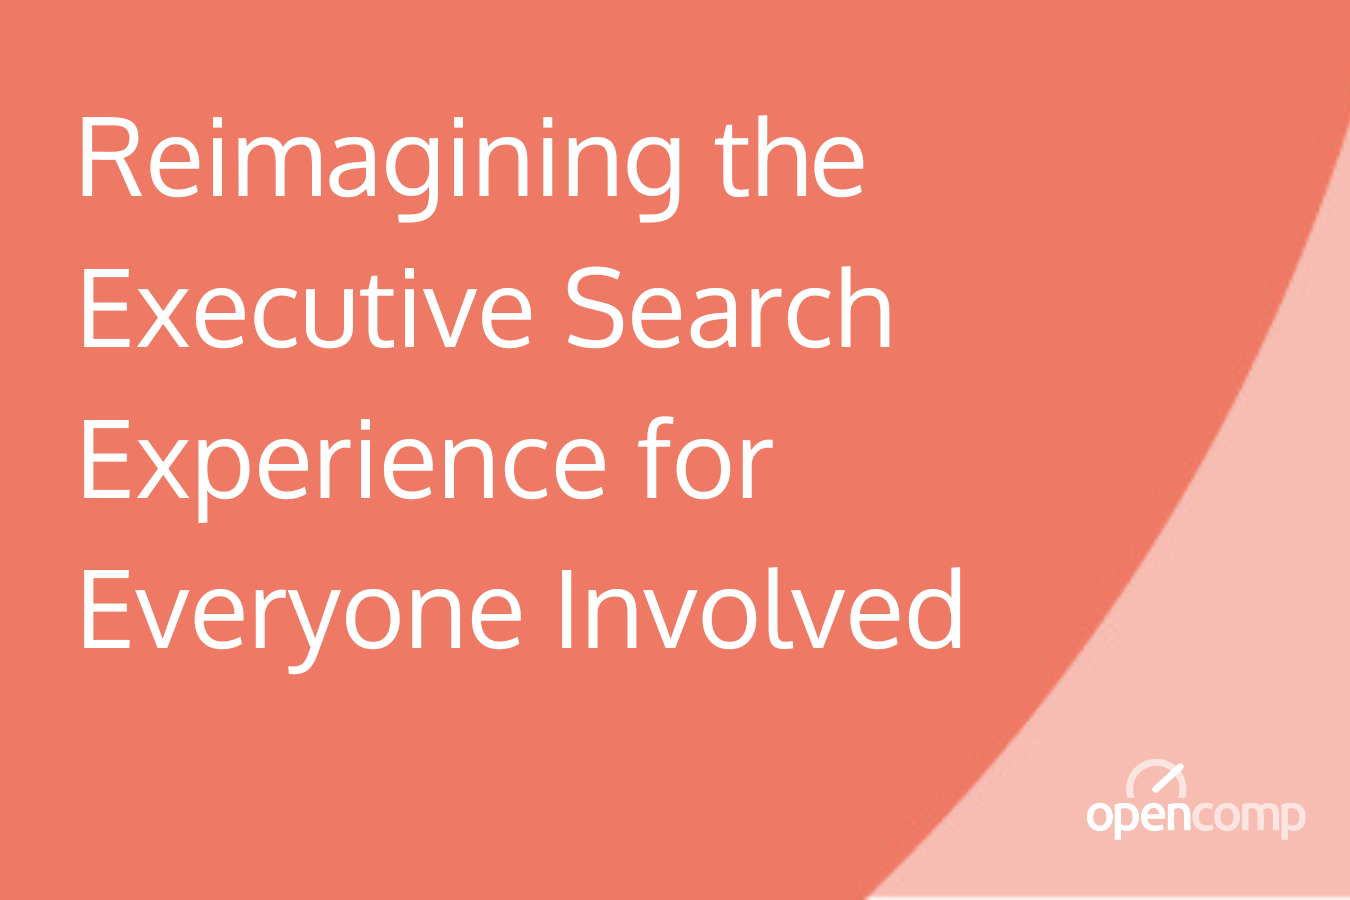 Reimagining the Executive Search Experience for Everyone Involved